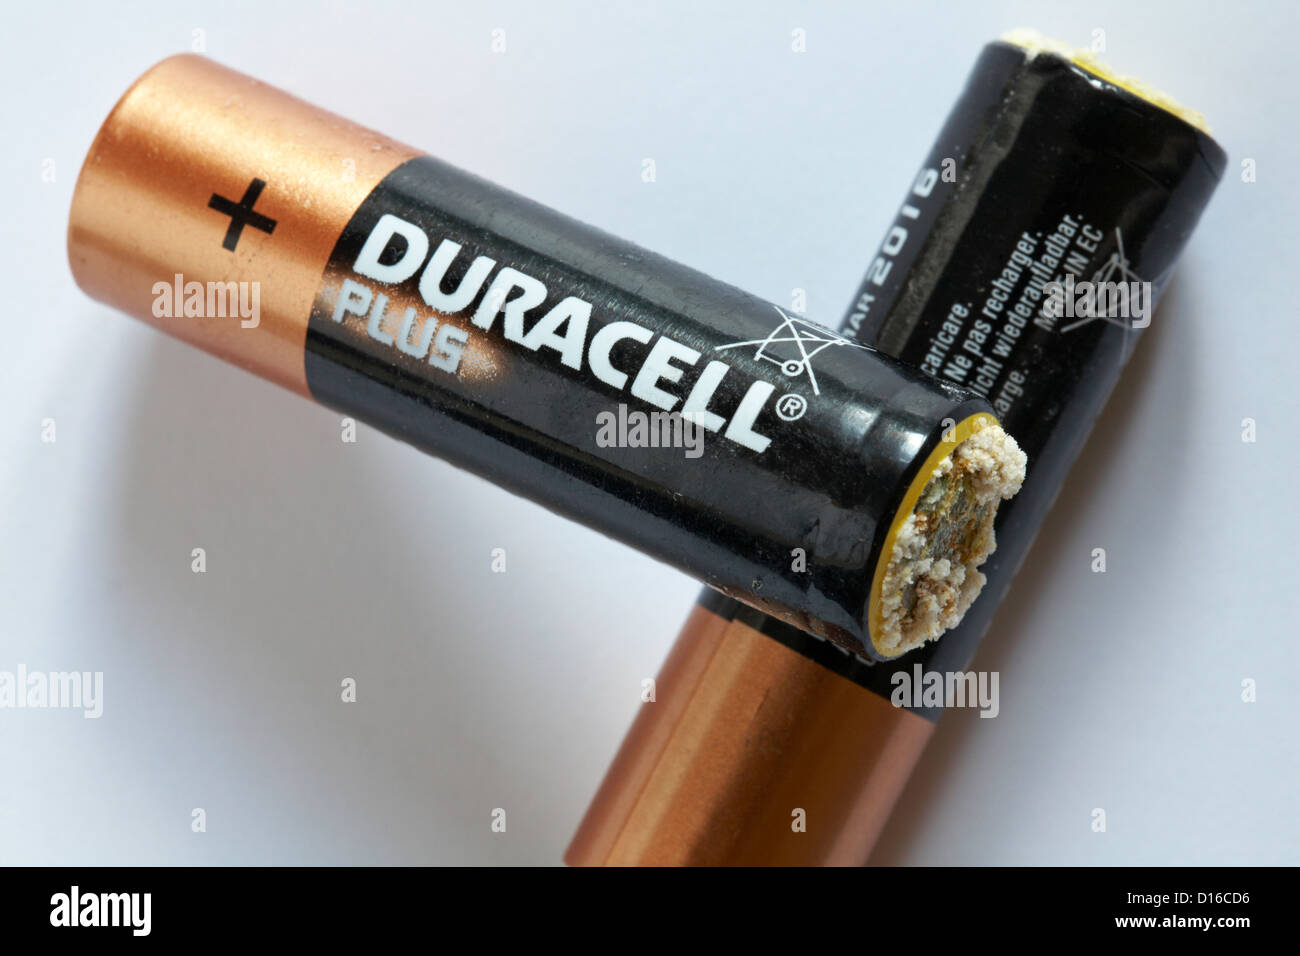 Duracell Horizontal High Resolution Stock Photography and Images - Alamy